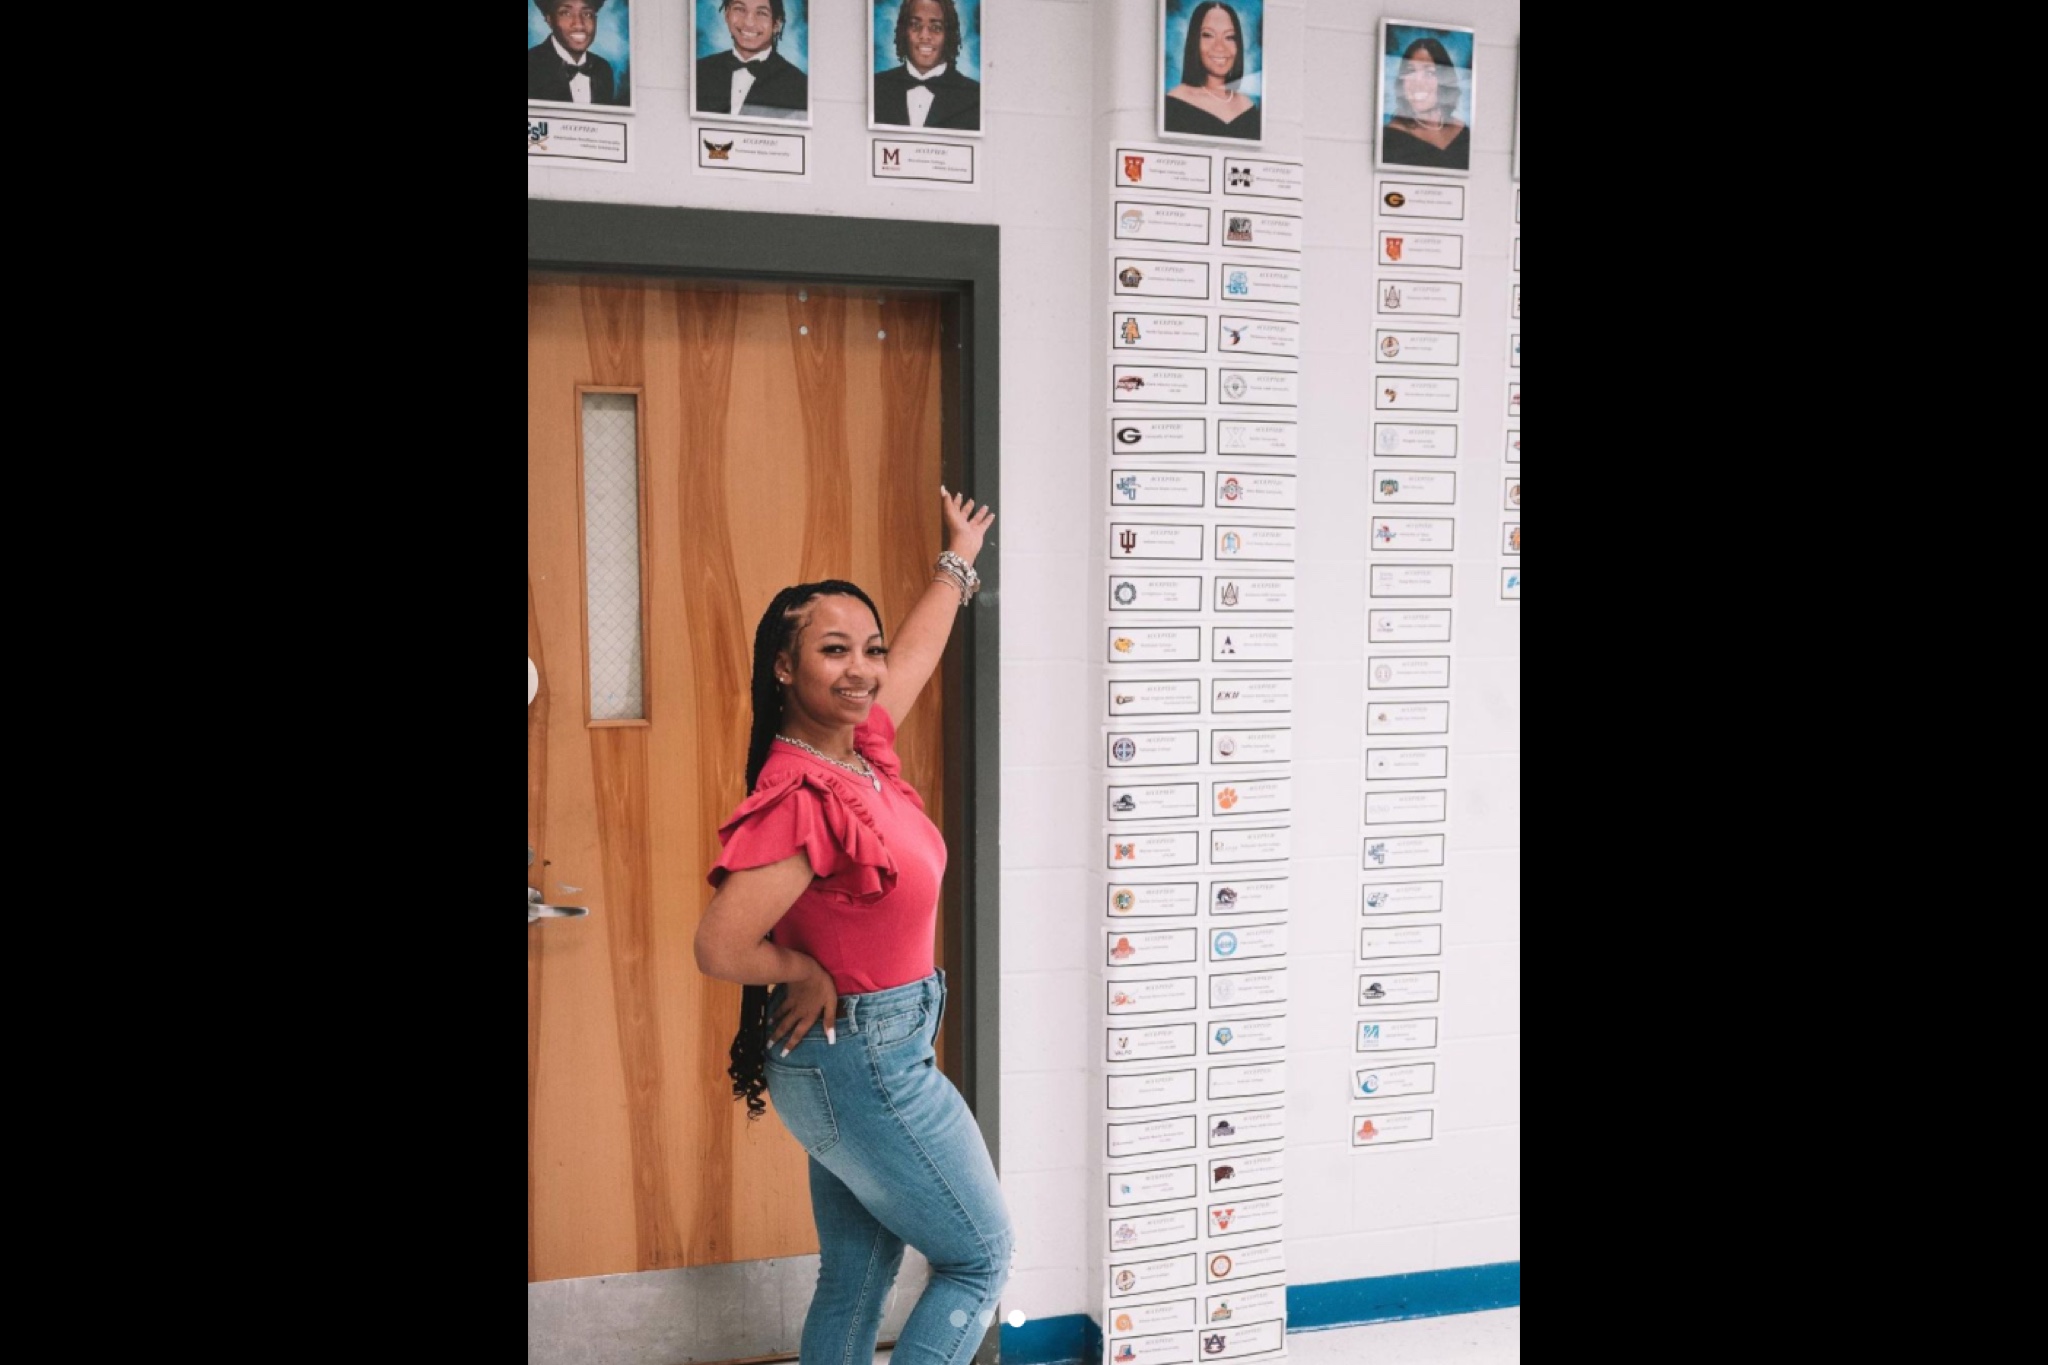 South Fulton High School Senior Makenzie Thompson Receives 49 College Acceptance Letters & Over $1.3M In Scholarship Offers